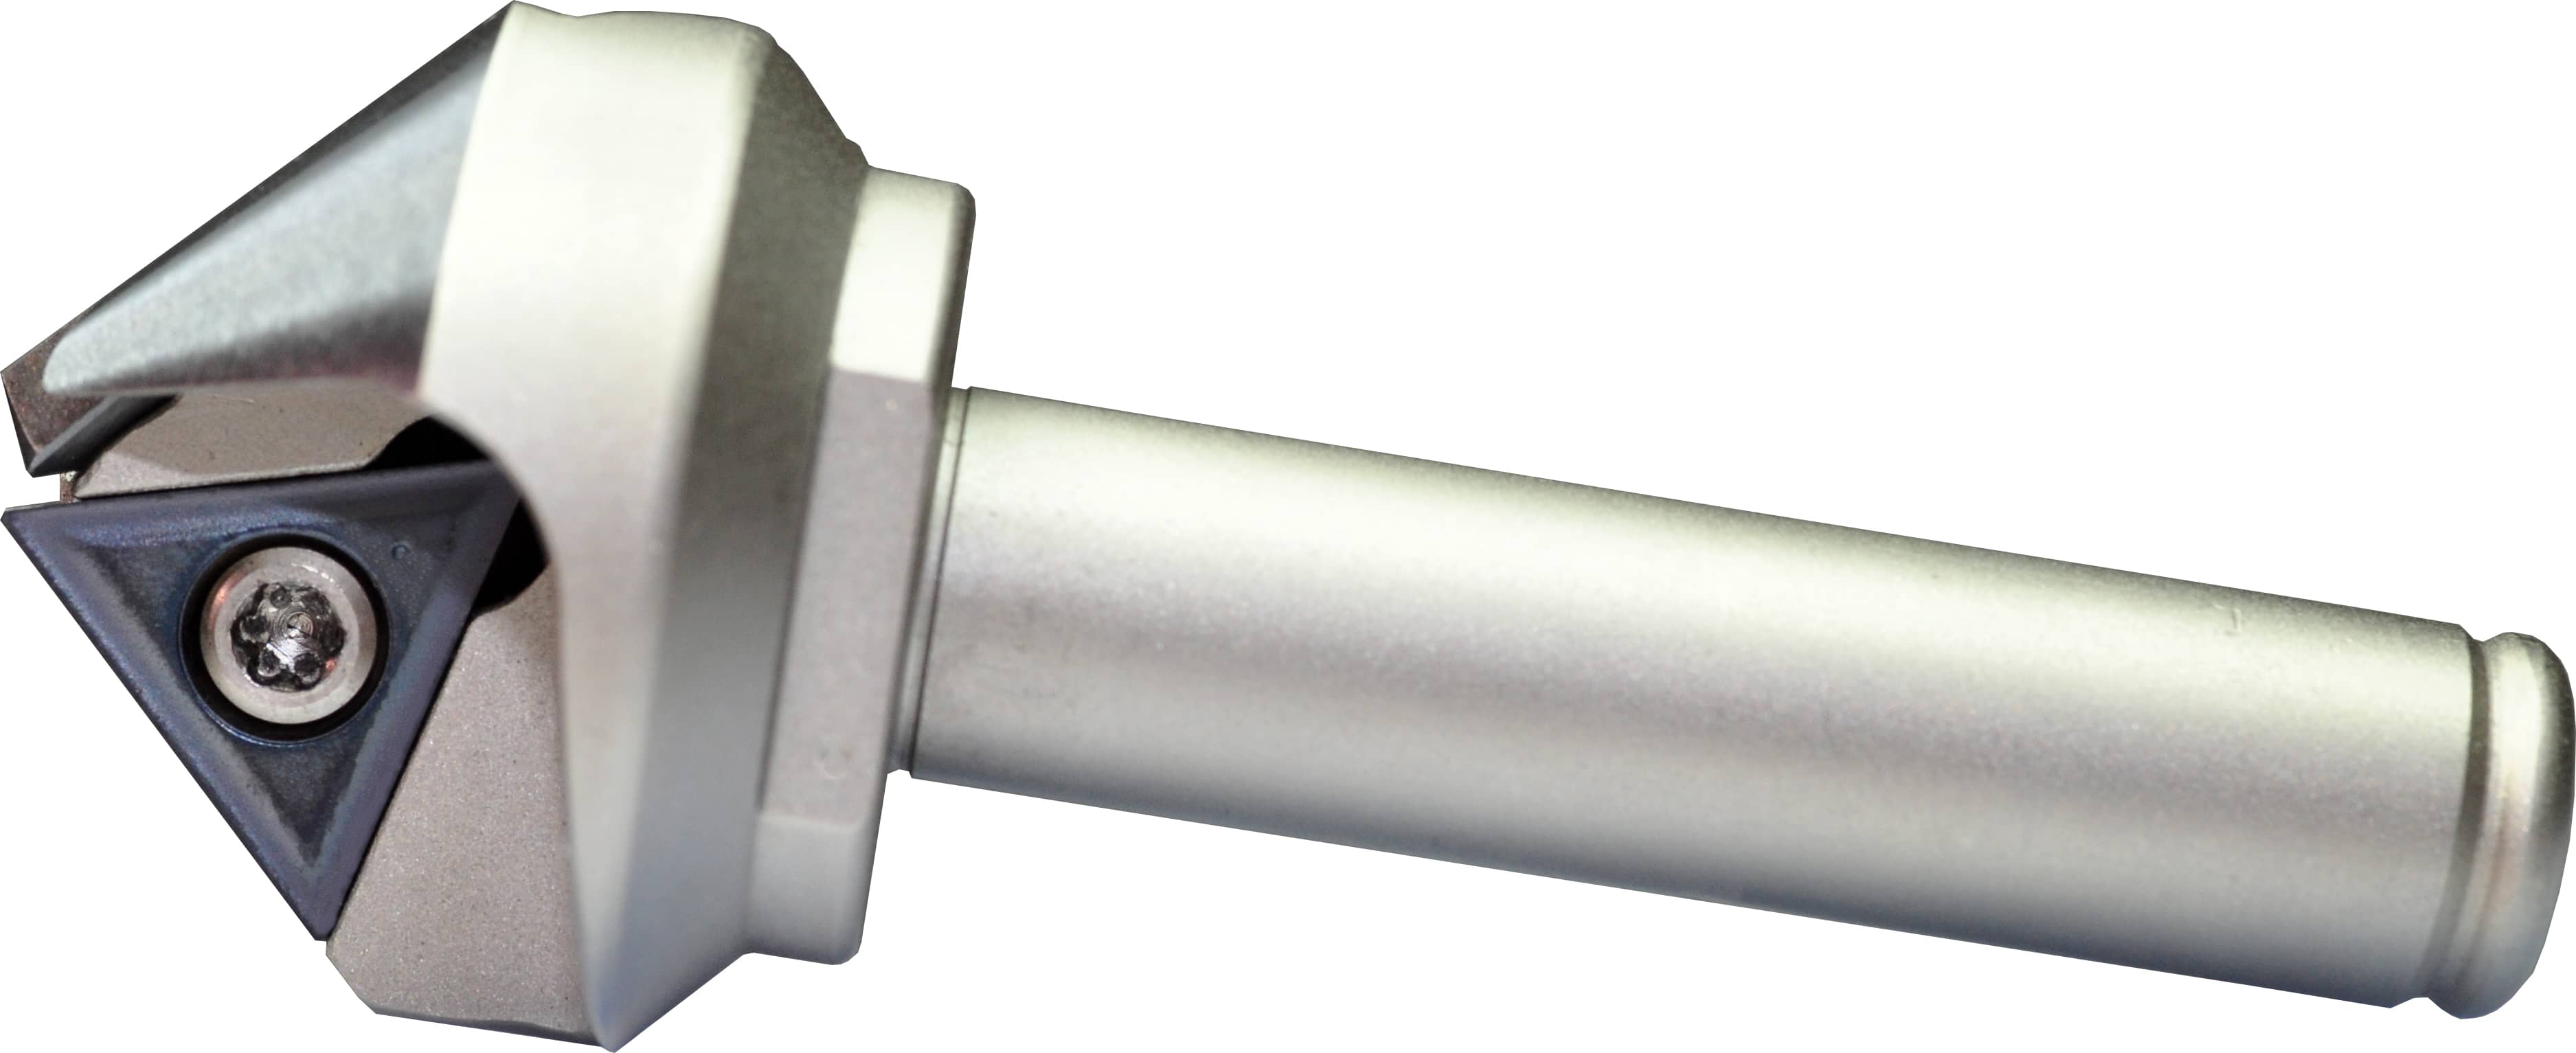 CHAMFER TOOL FOR MANUAL BENCH DRILLING